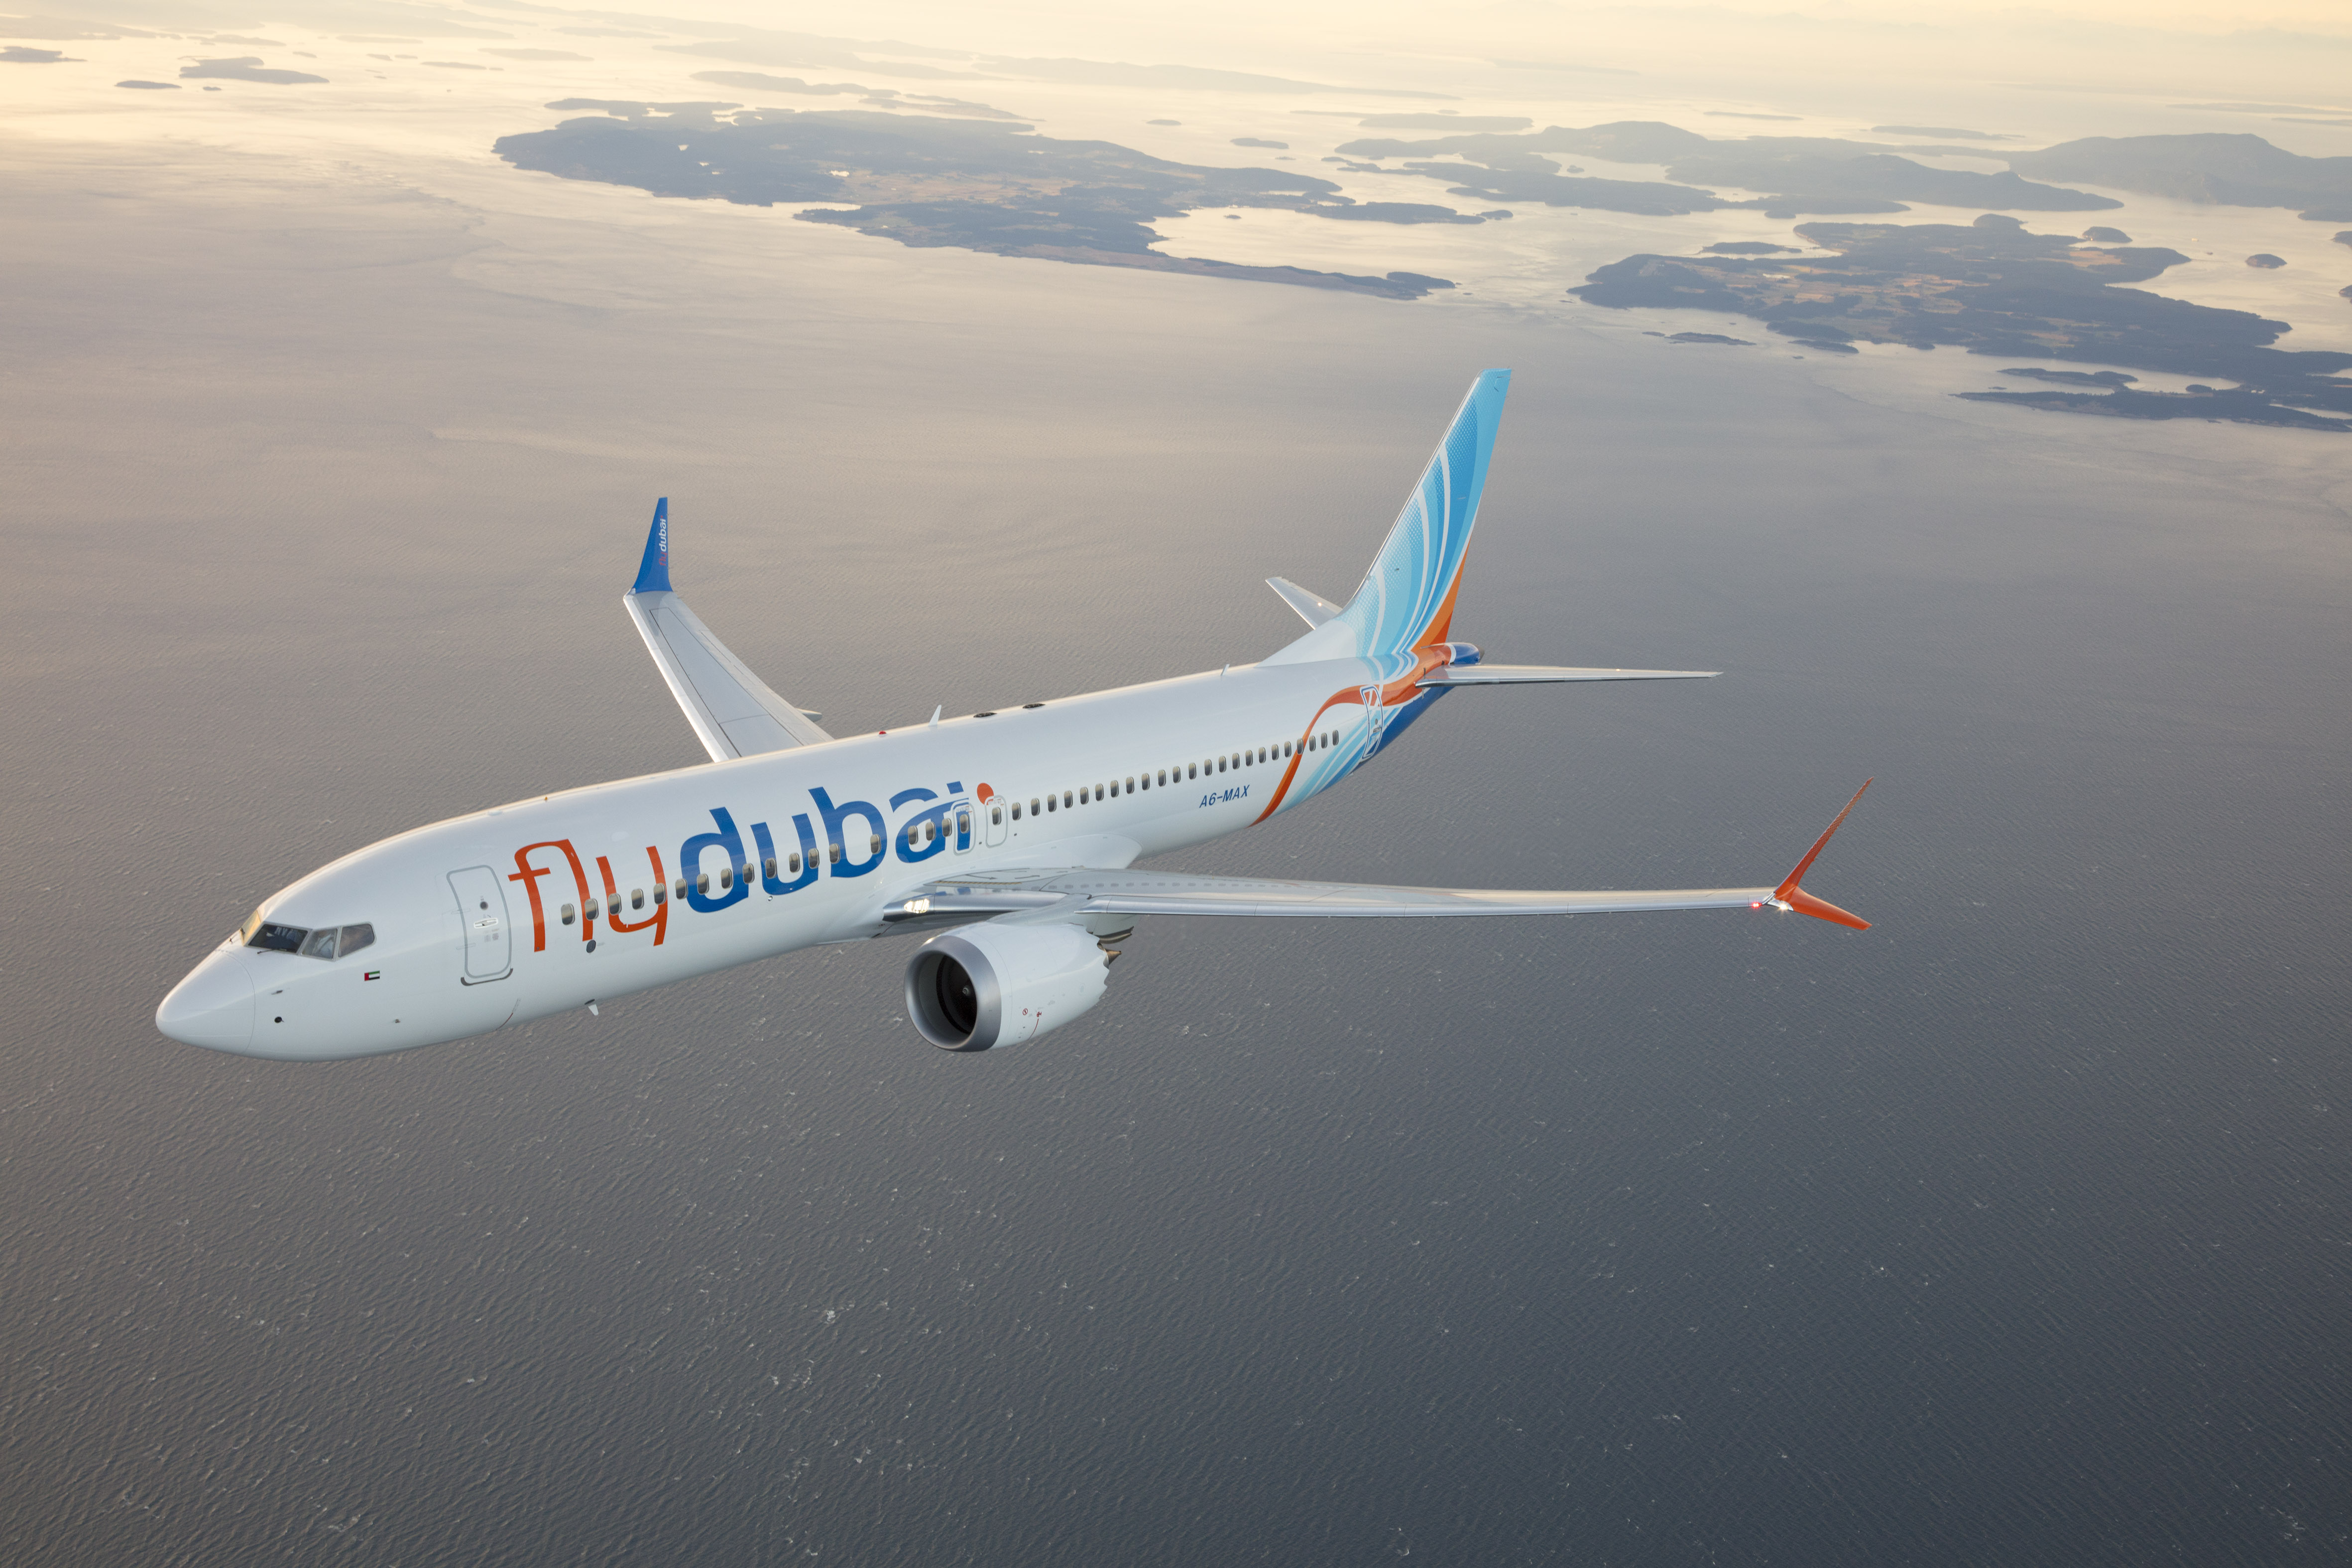 AAR signs multi-year contract for flydubai’s Boeing 737 MAX fleet